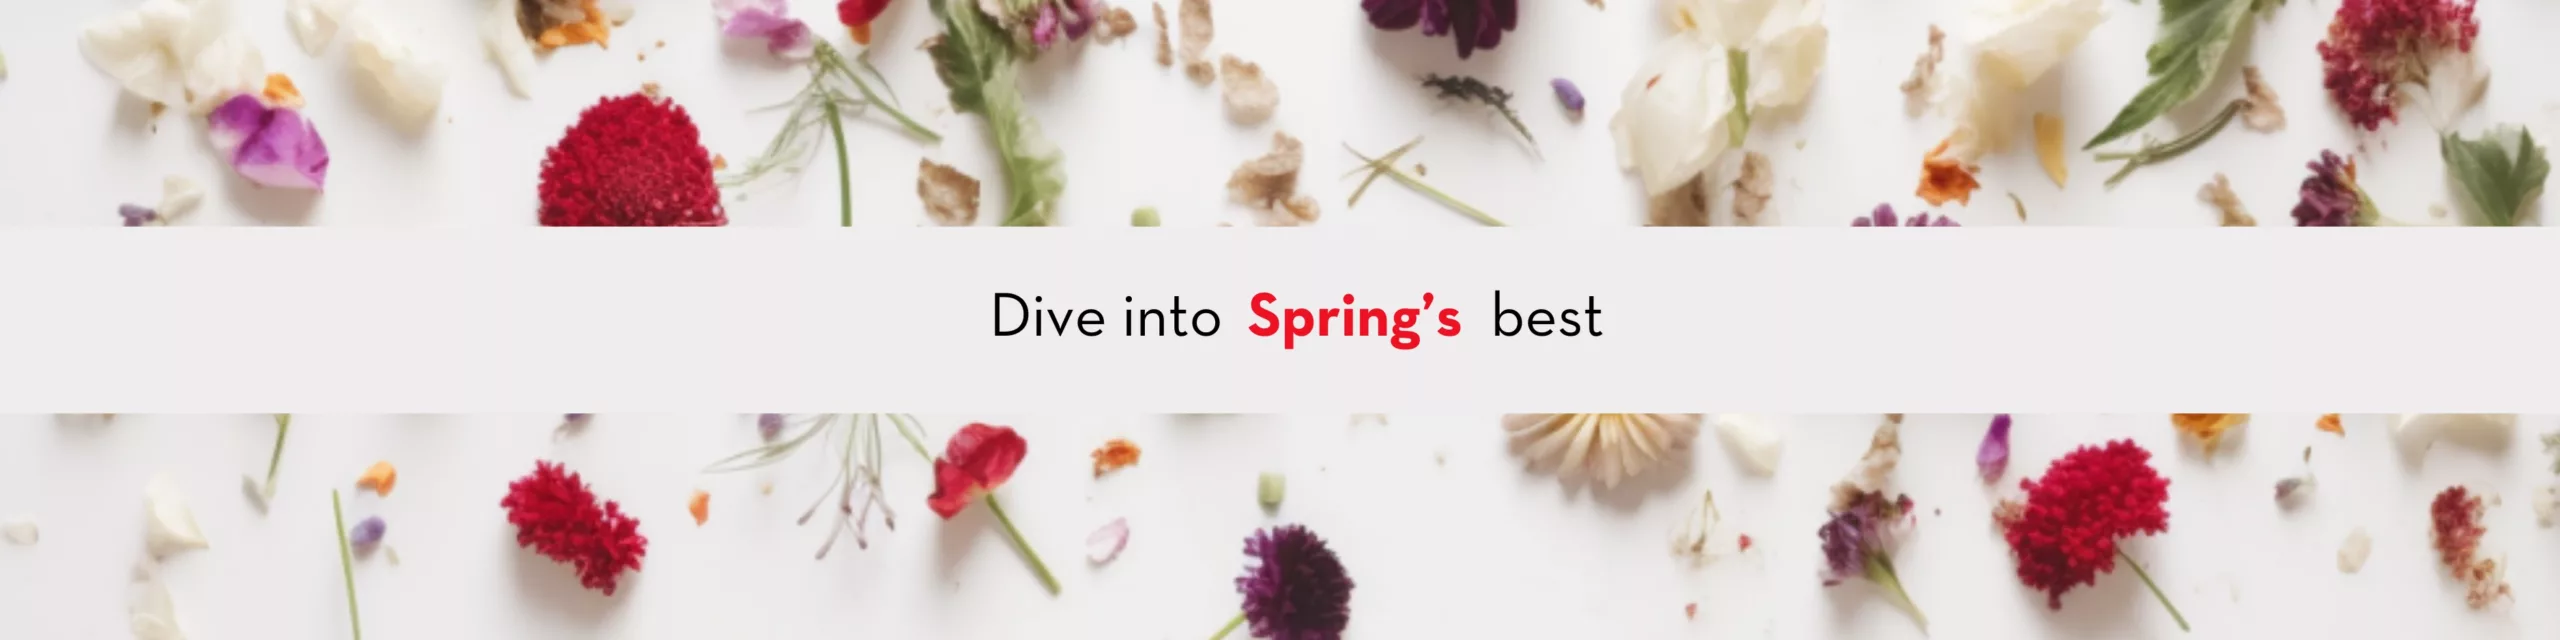 Dive into spring's best